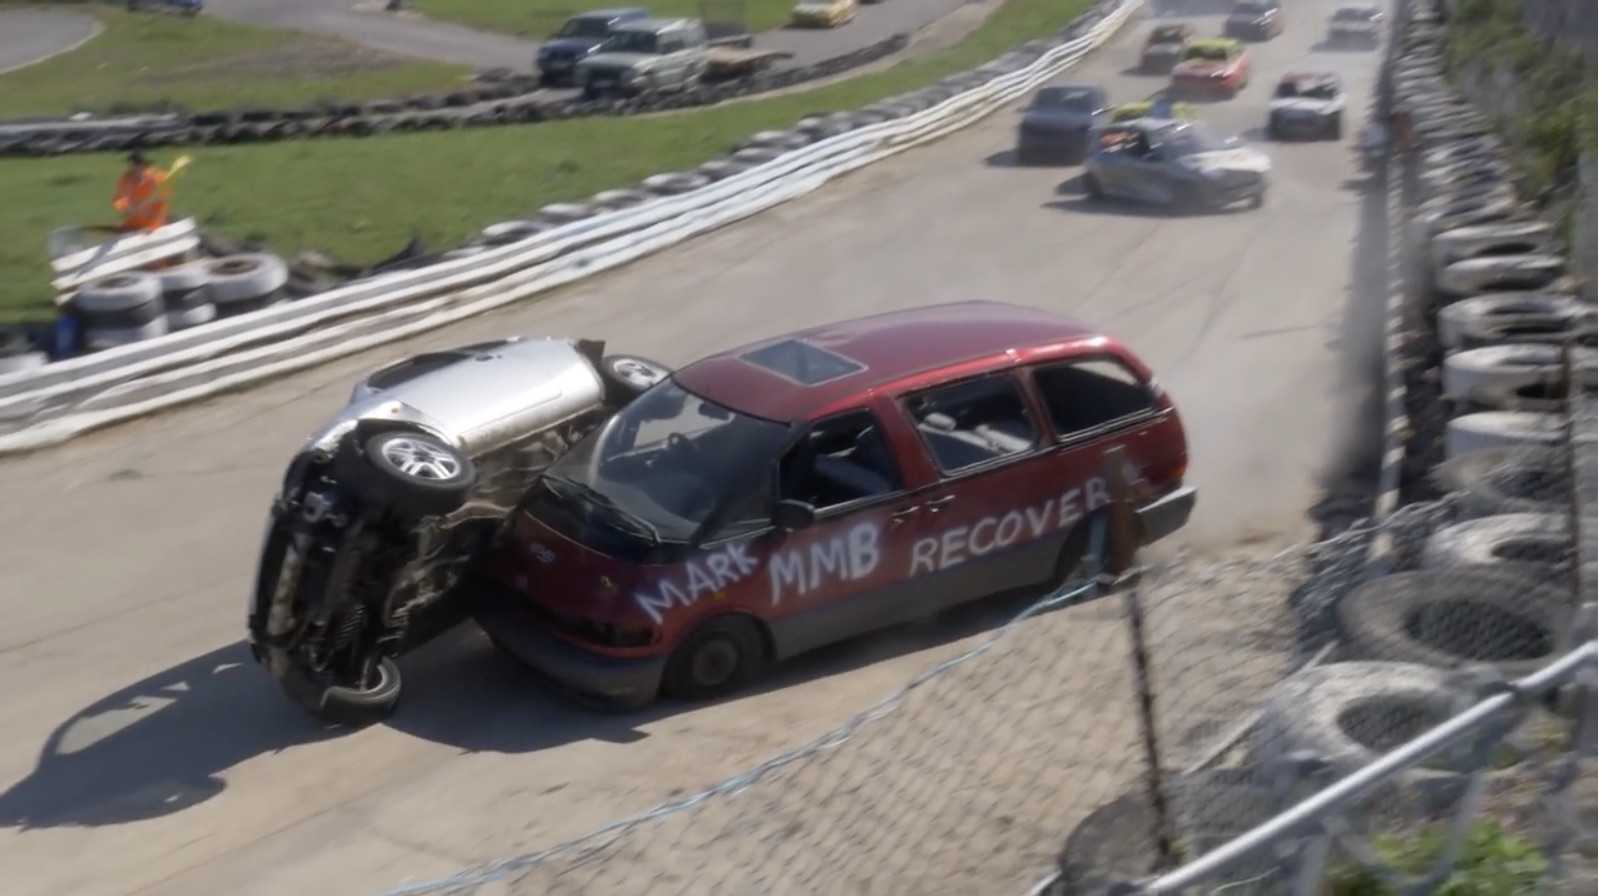 Gestalt Therapy: Who Needs A Shrink When Banger Racing Cures All Of Your Stress?